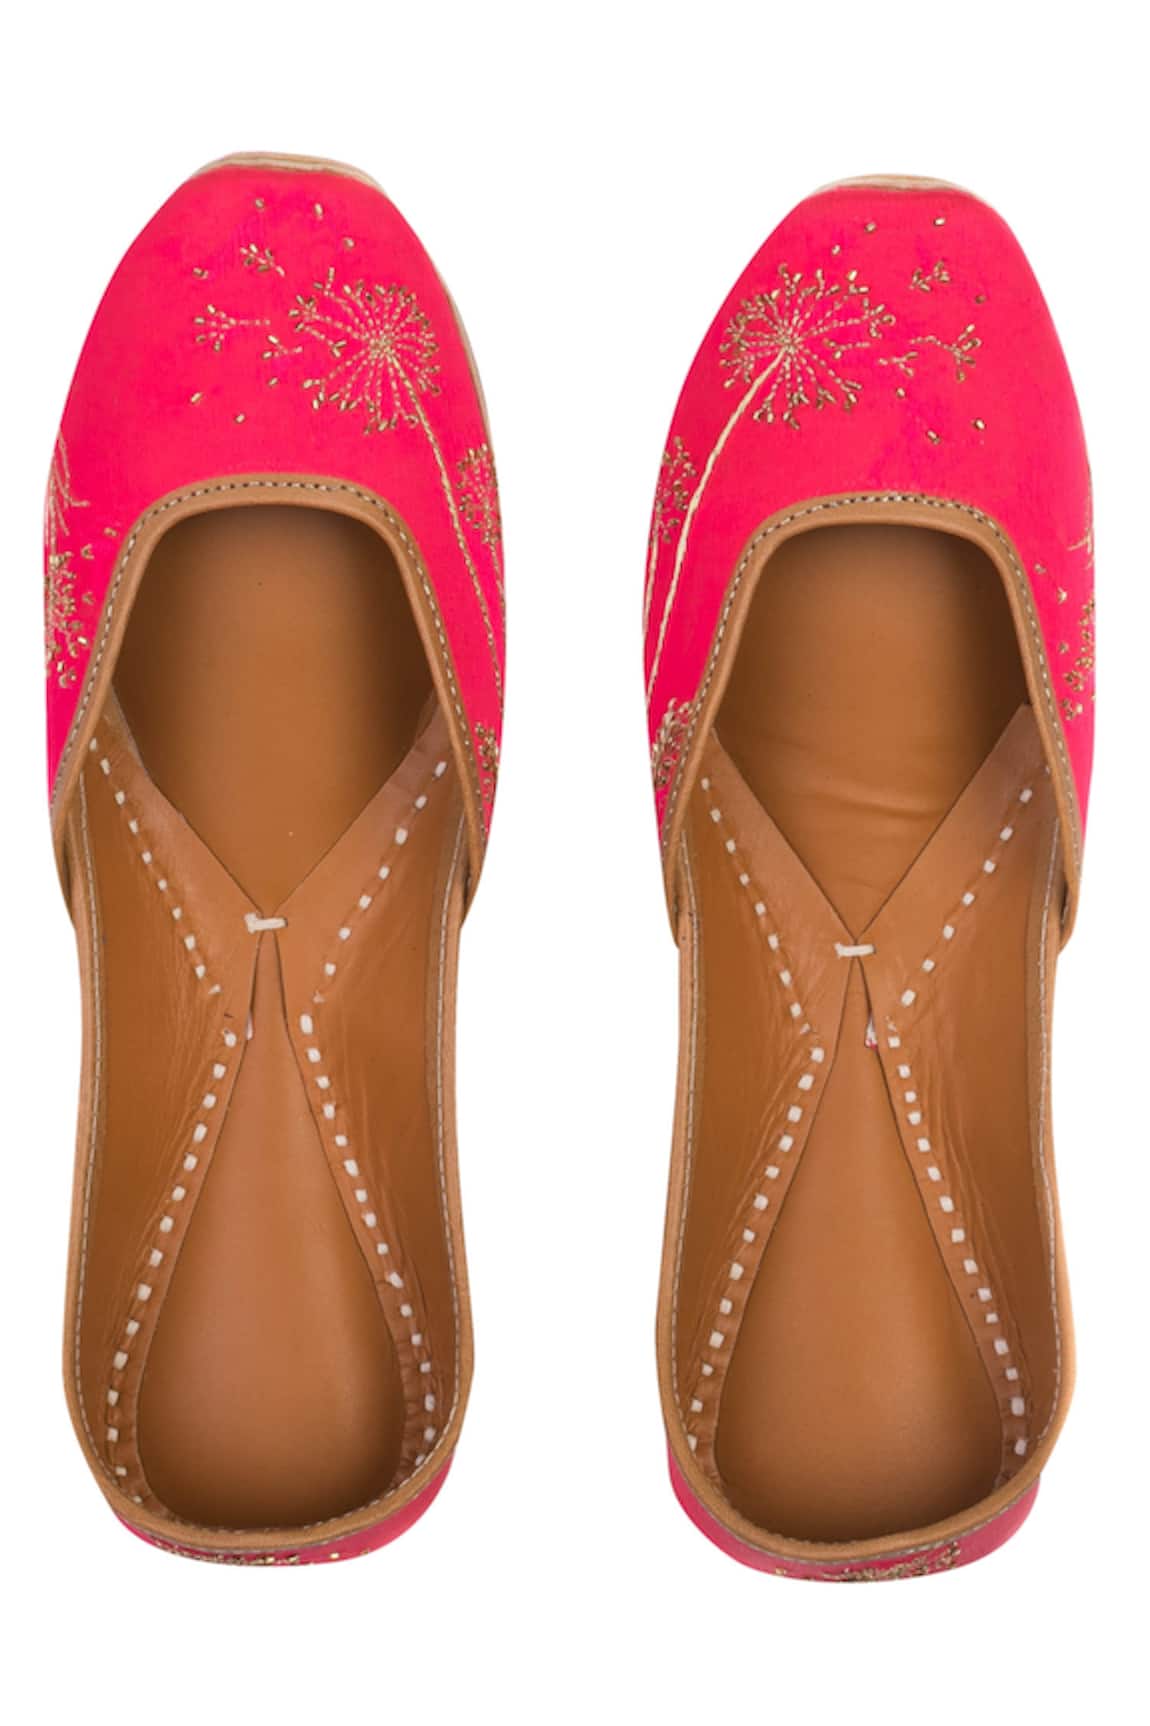 Shilpsutra Embroidered Leather Juttis